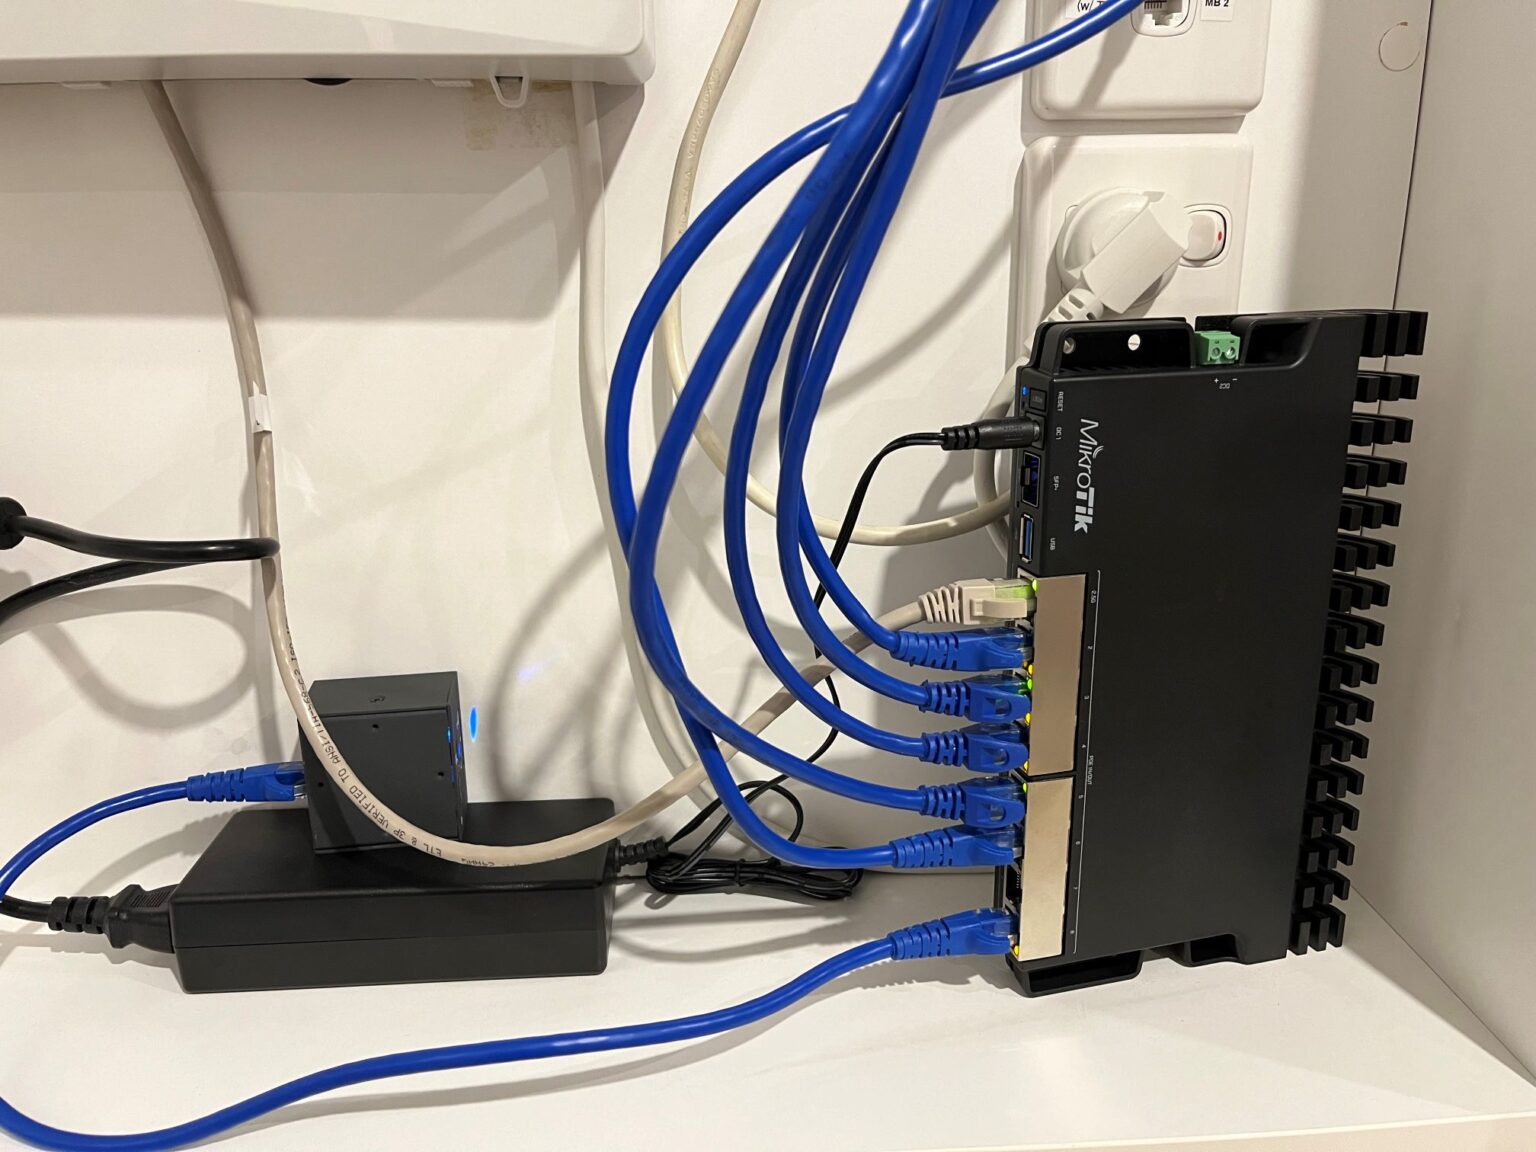 New Mikrotik router to replace the Unifi USG